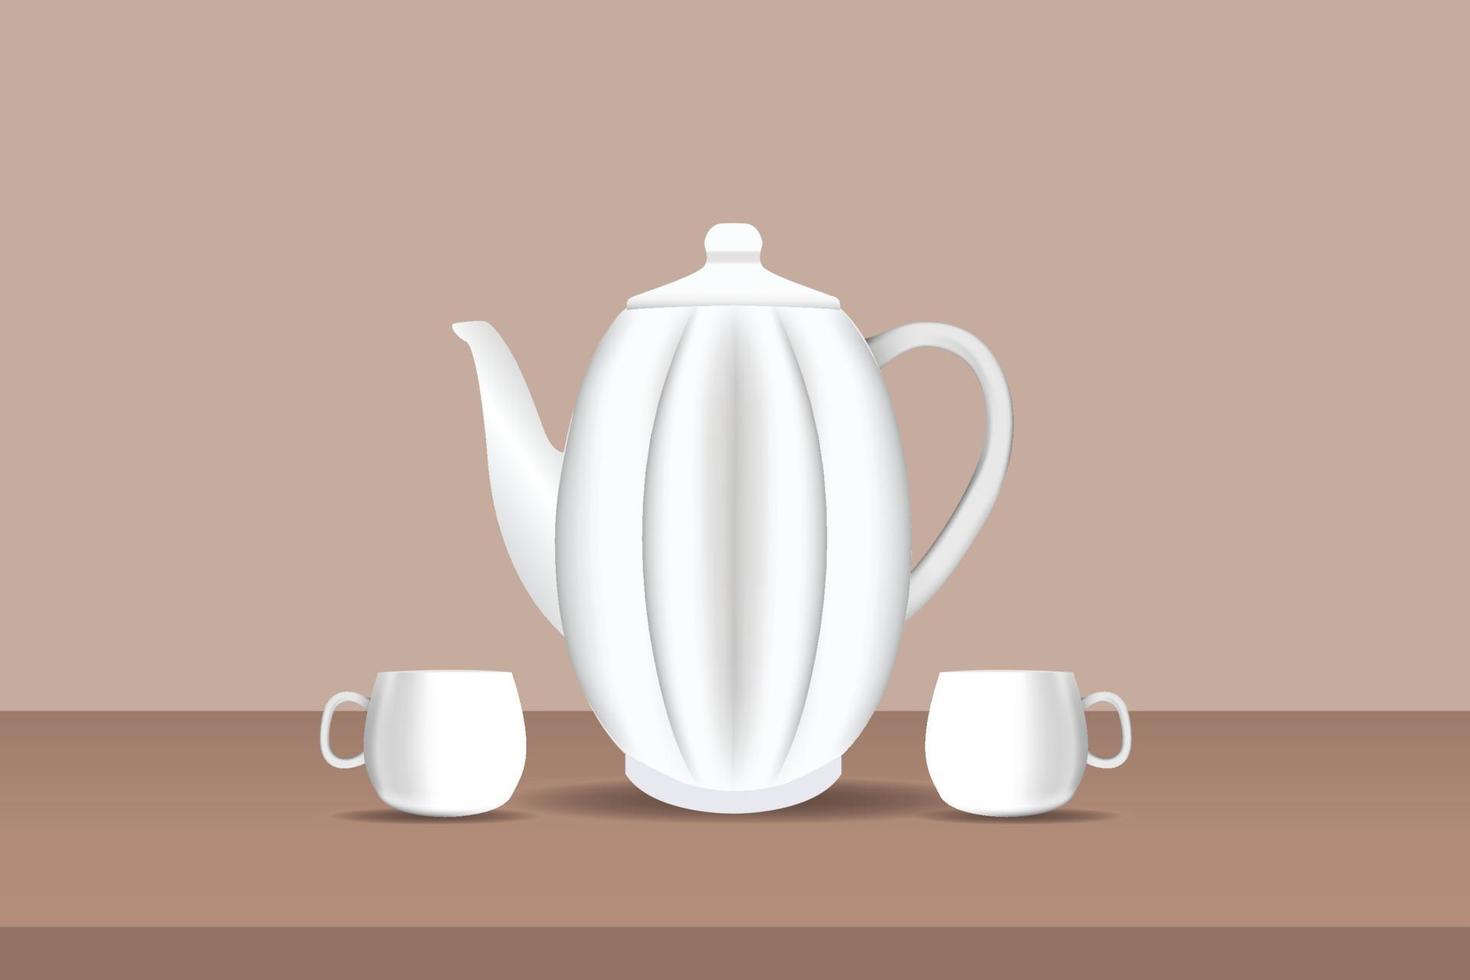 The Teapot and Two Cups Design, On A Brown Background Table With Traditional Shades, Can Be Used For Your Tea Design Needs. vector